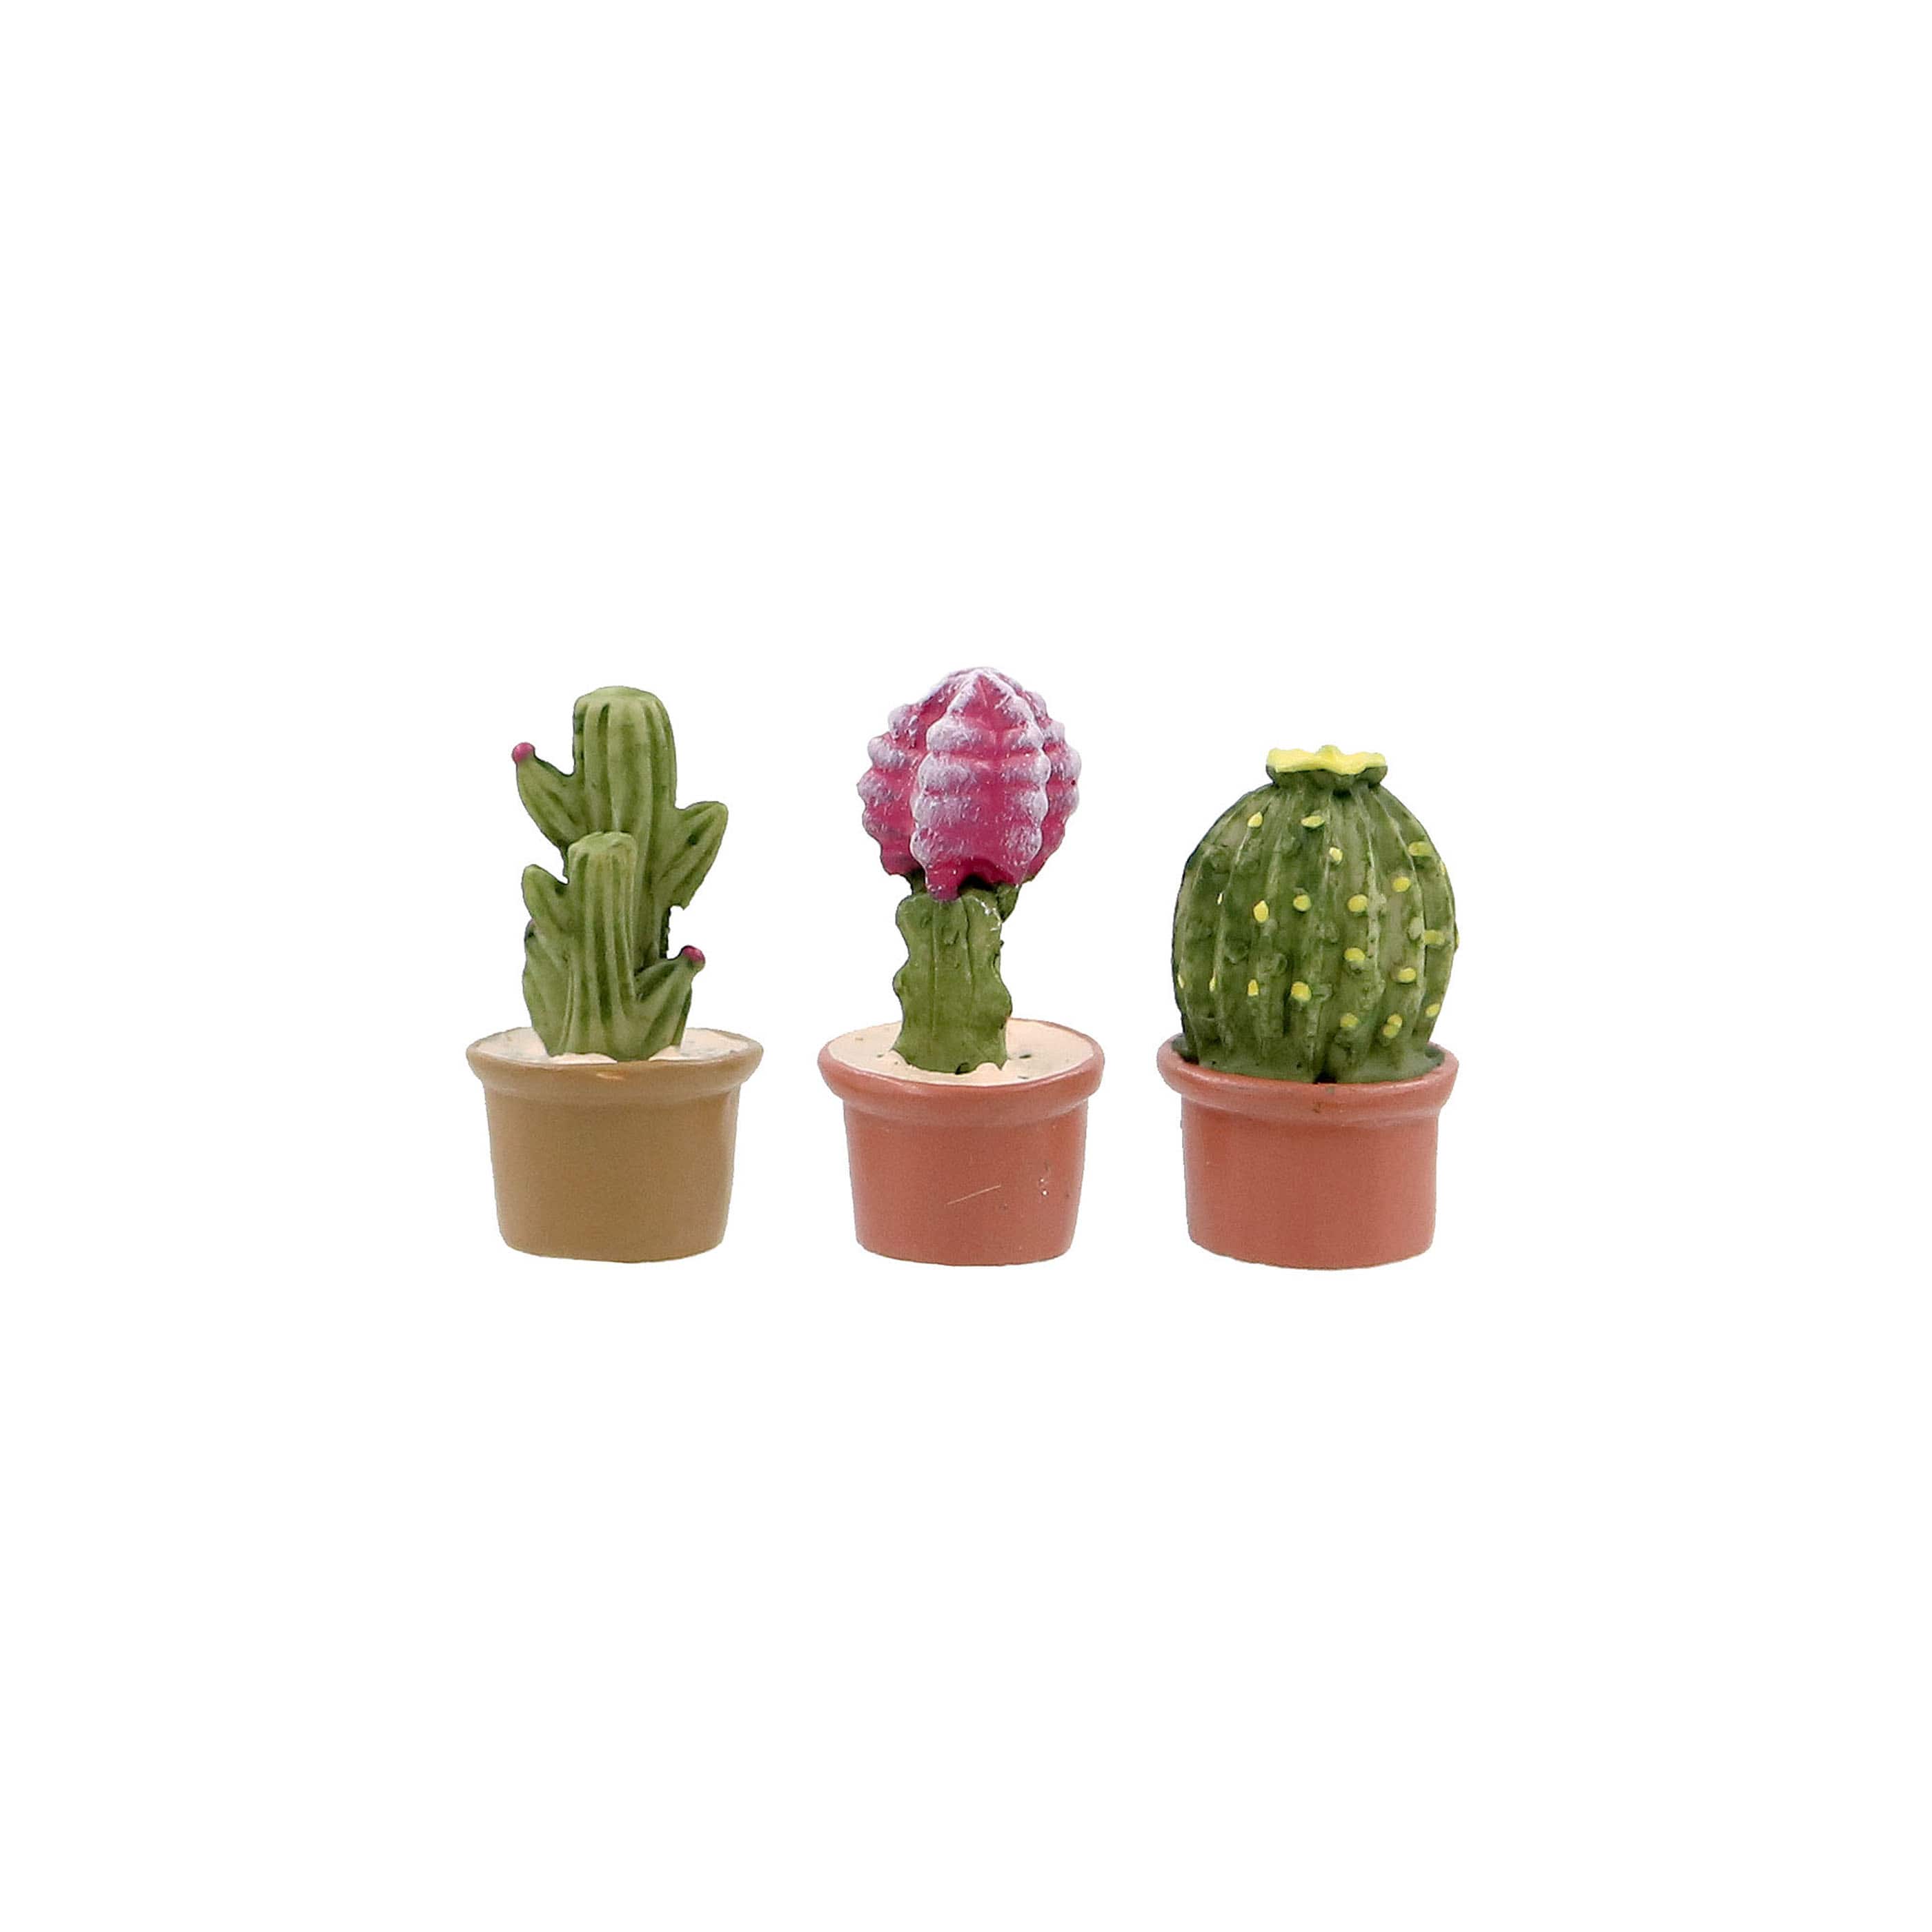 Order Your Custom Foam Inserts from Cactus Containers